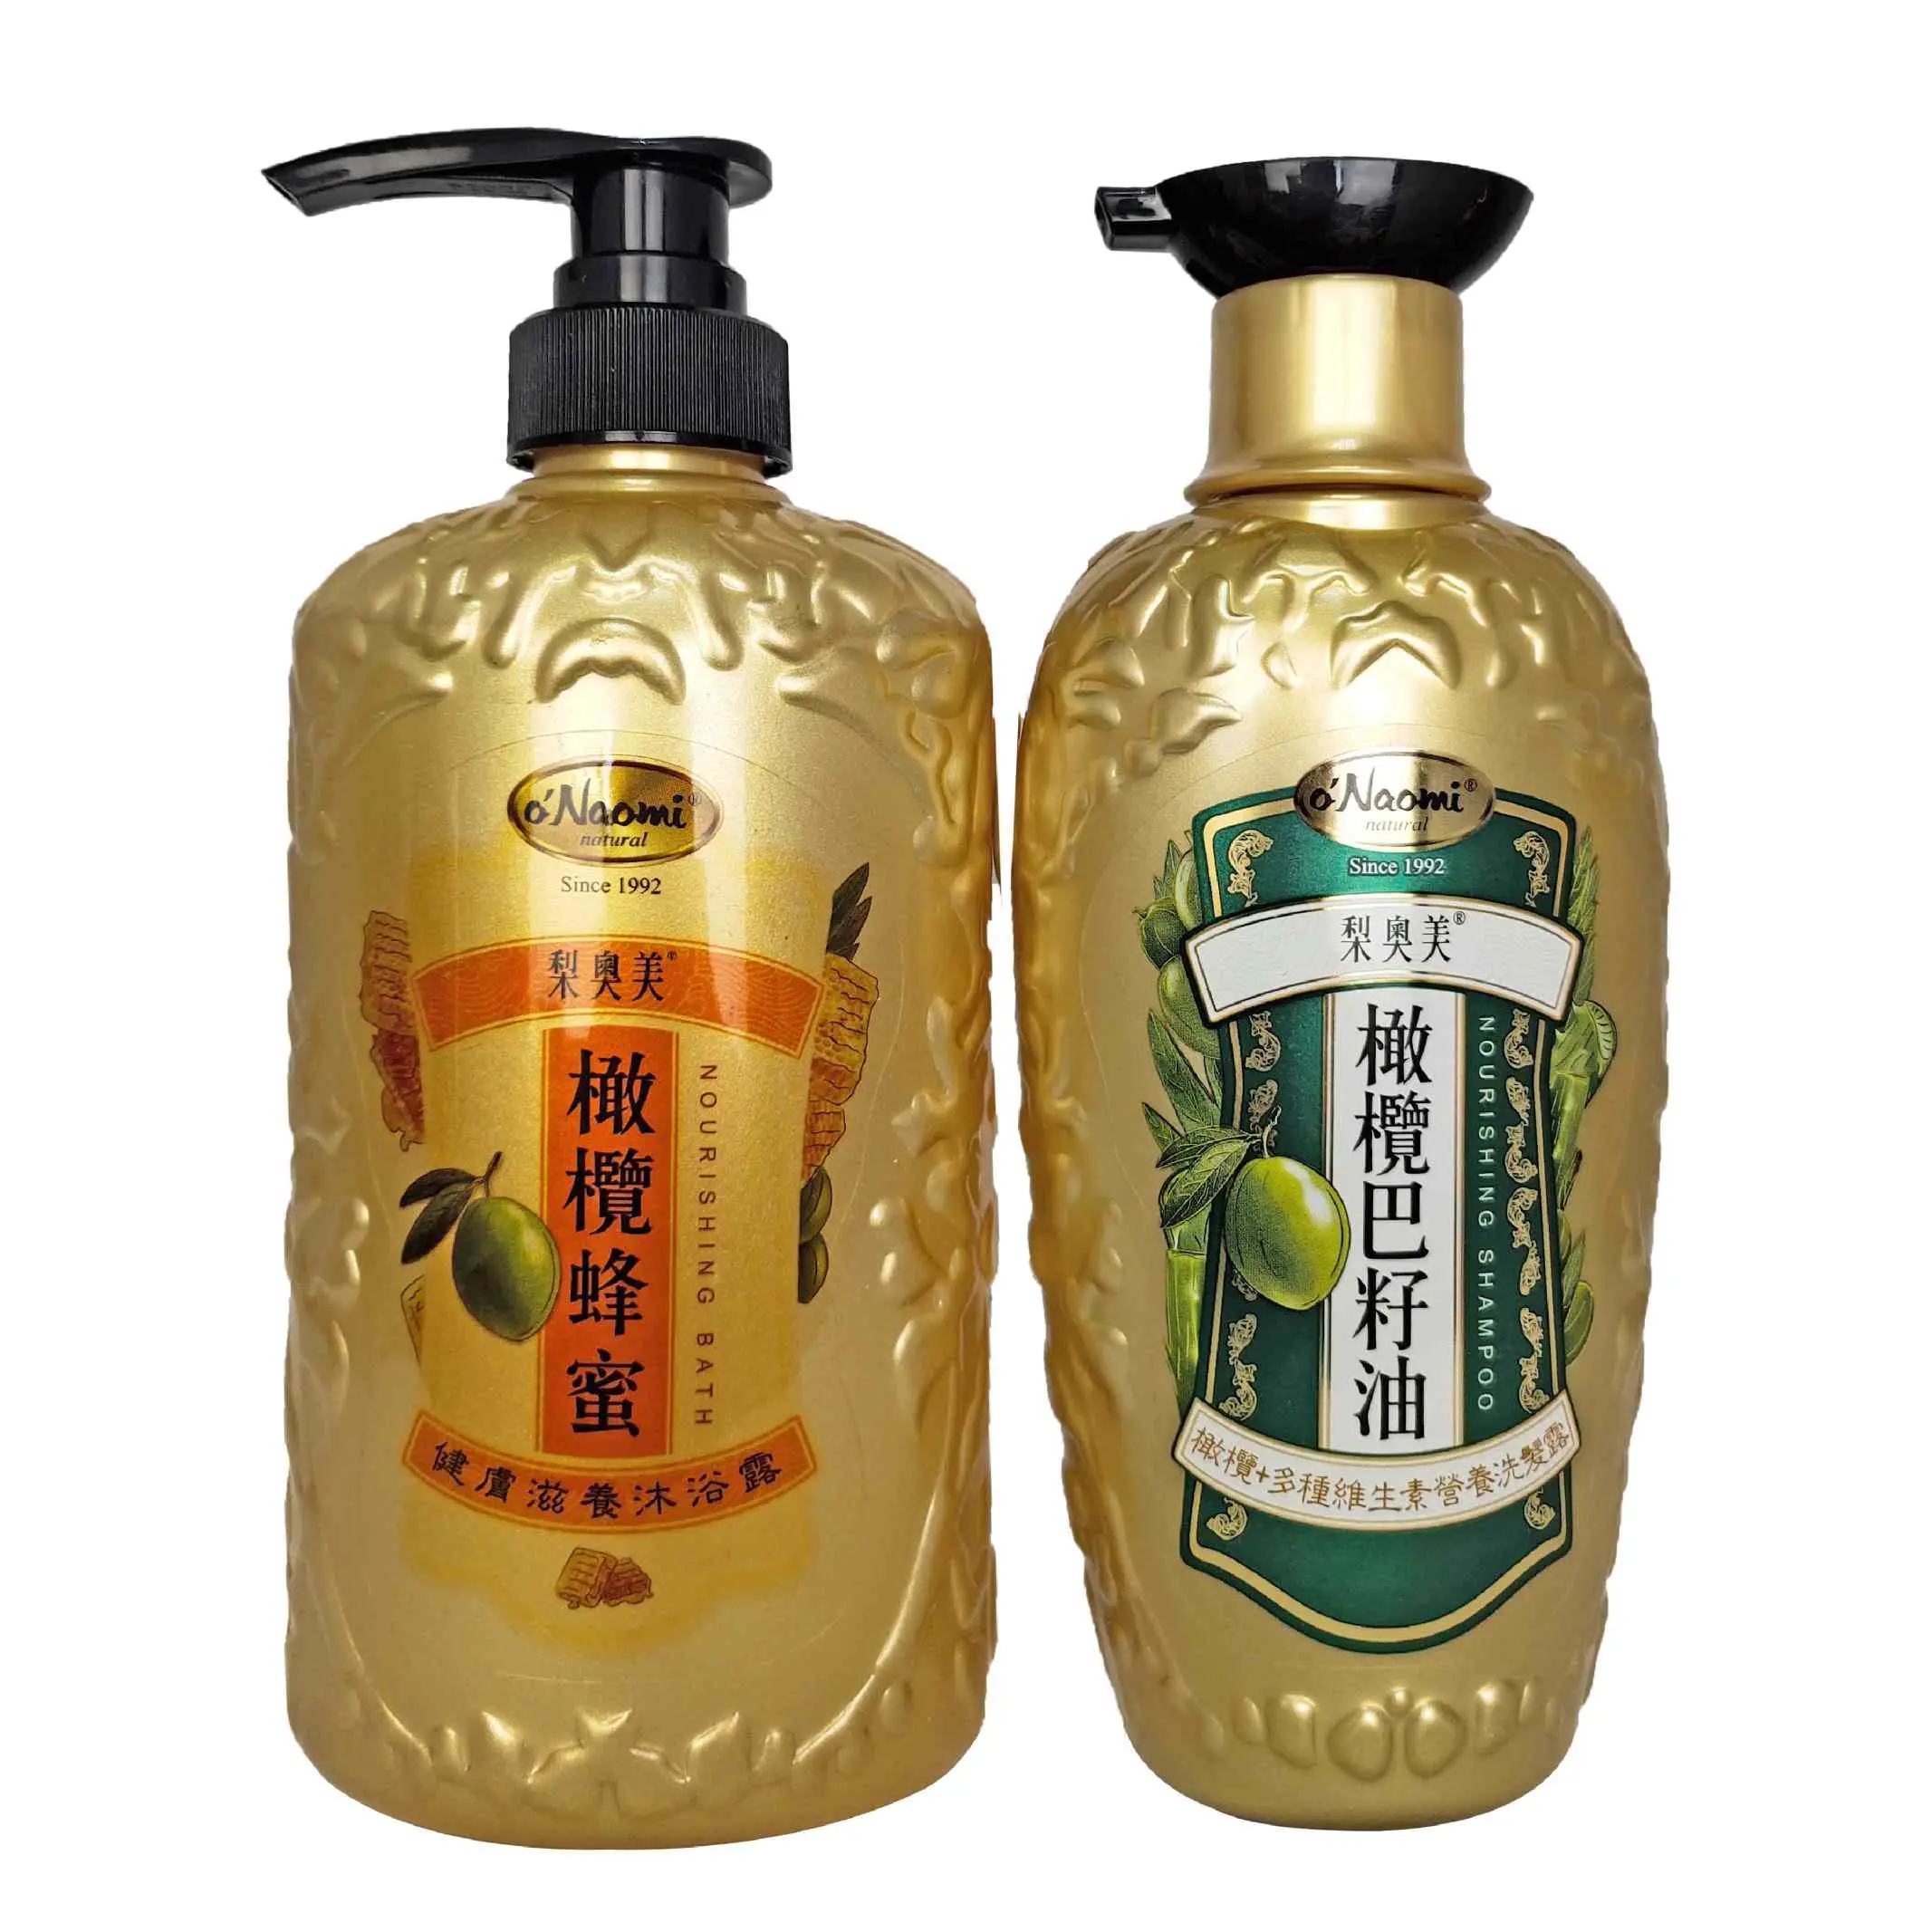 personal care products manufacturer